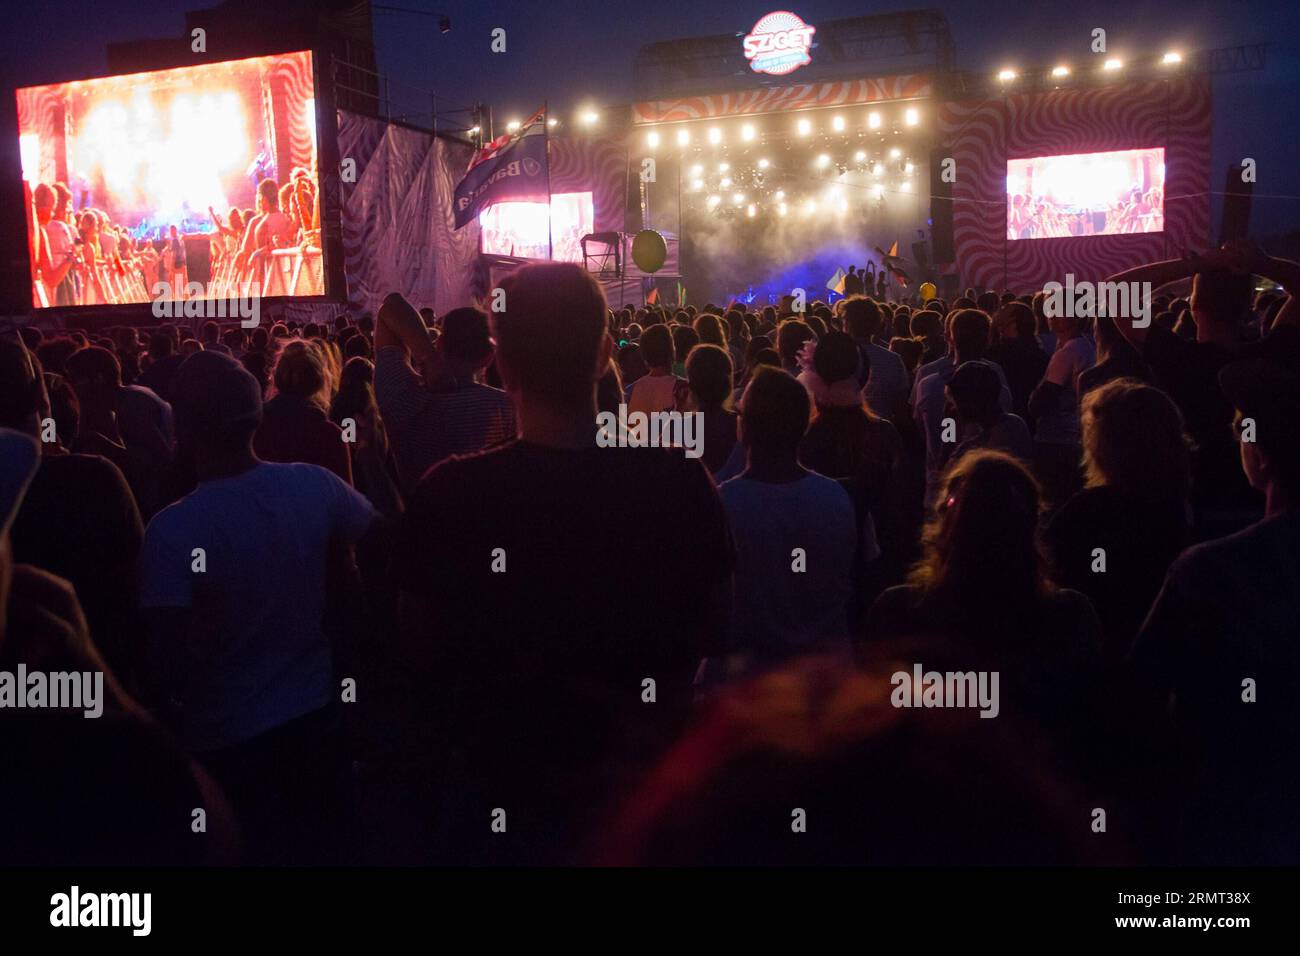 BUDAPEST, Aug. 12, 2014 -- People enjoy a concert at the Sziget (Hungarian for Island ) festival on the Obuda Island in Budapest, Hungary, on Aug. 12, 2014. The 22nd Sziget festival is held from Aug. 11 to Aug. 17. It is one of the largest music festivals in Europe, attracting nearly 400,000 people every year.) HUNGARY-BUDAPEST-SZIGET FESTIVAL AttilaxVolgyi PUBLICATIONxNOTxINxCHN   Budapest Aug 12 2014 Celebrities Enjoy a Concert AT The Sziget Hungarian for Iceland Festival ON The Obuda Iceland in Budapest Hungary ON Aug 12 2014 The 22nd Sziget Festival IS Hero from Aug 11 to Aug 17 IT IS One Stock Photo